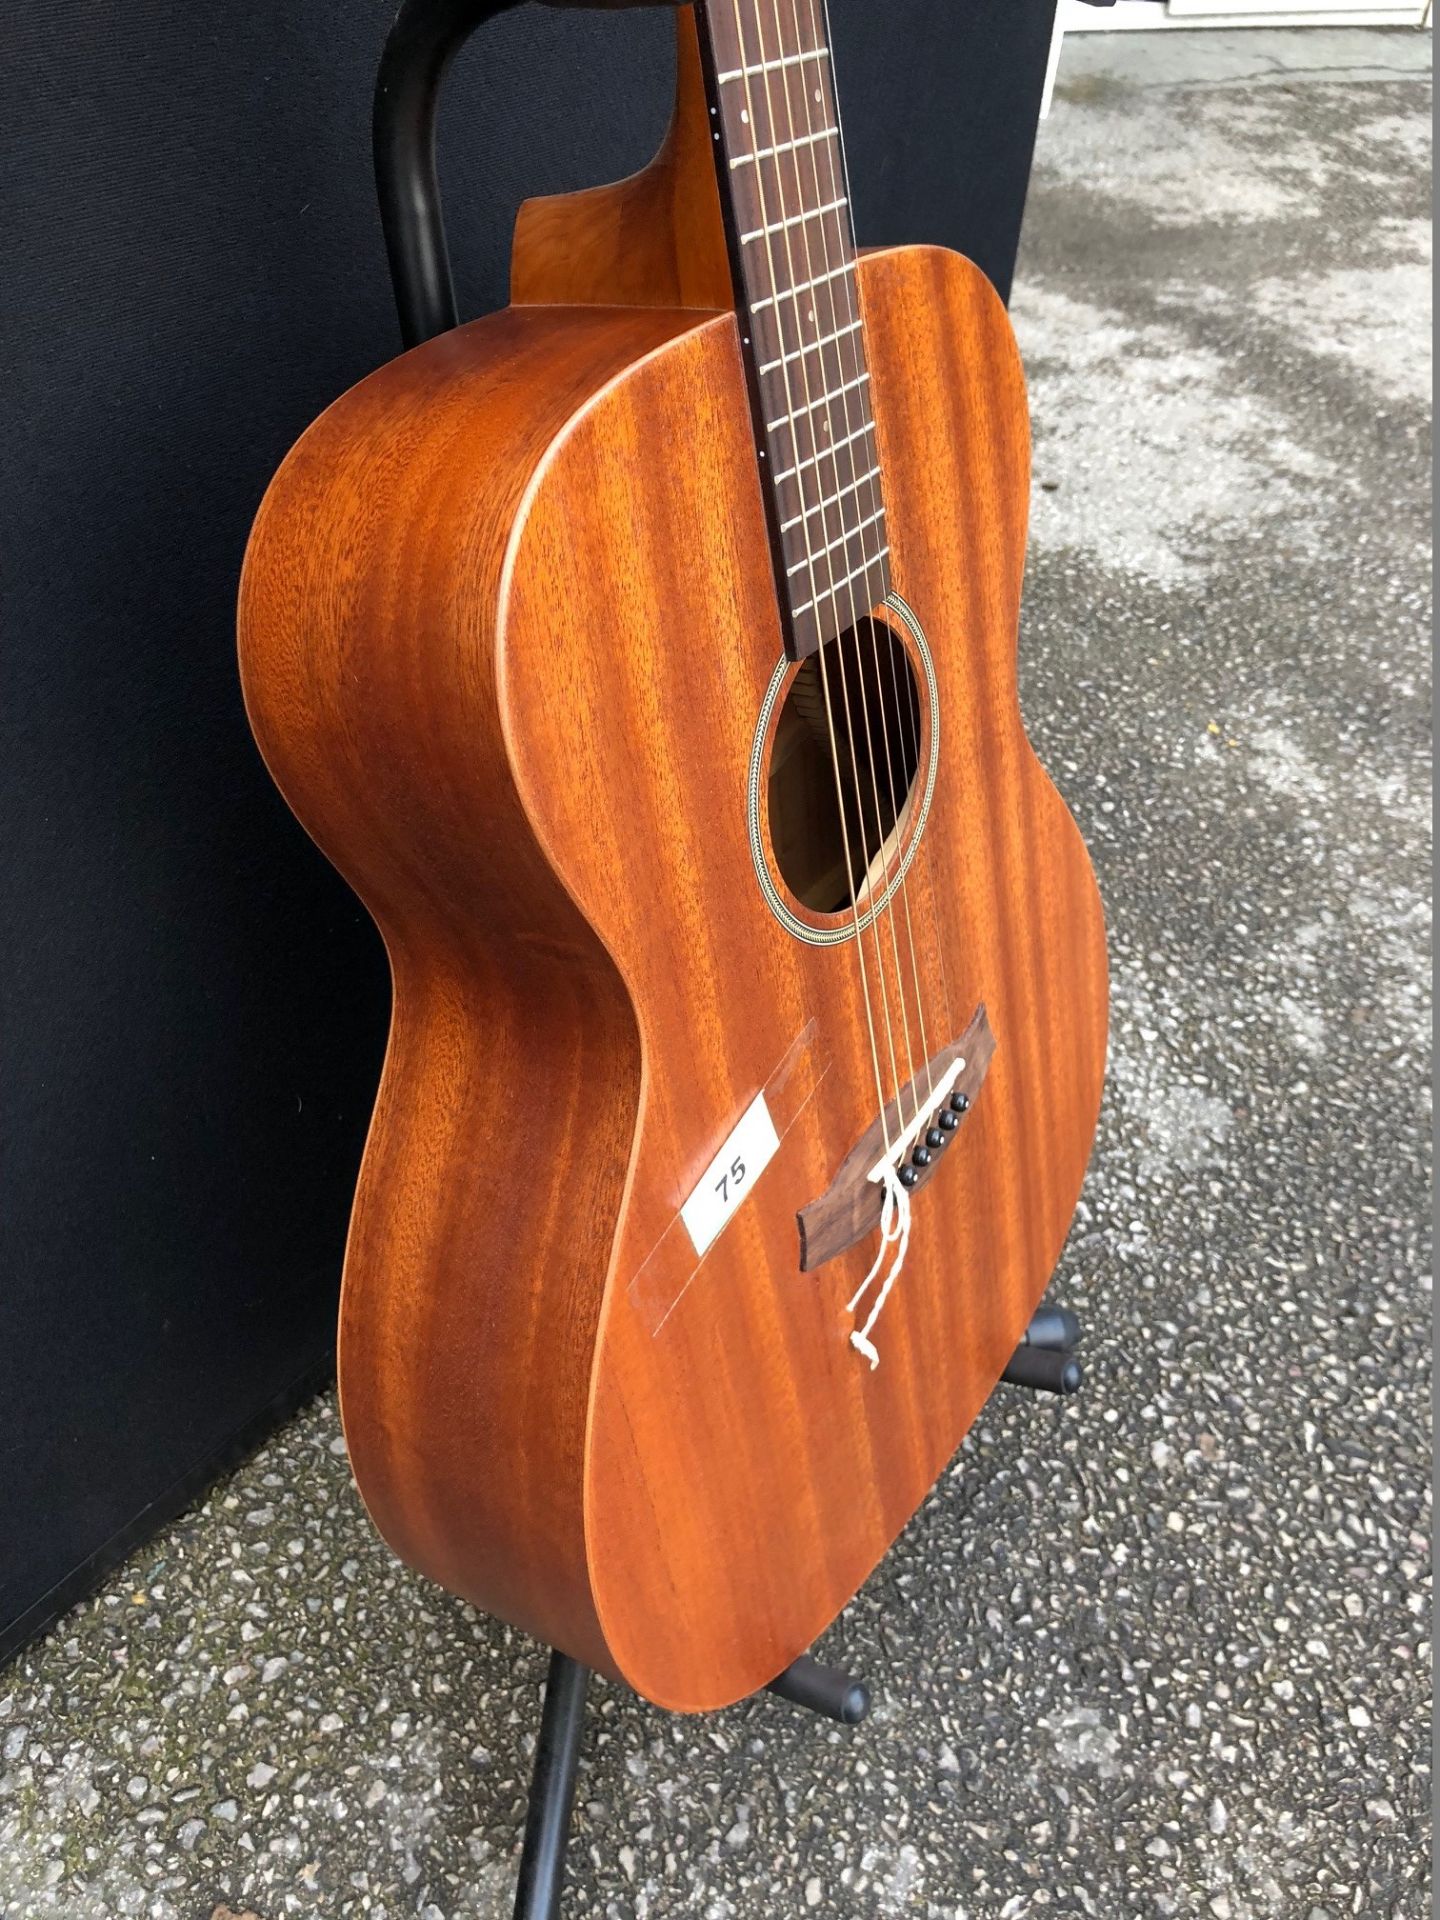 Tanglewood TW2 Acoustic Guitar (Brand New Ex Display - RRP £299.00) - Image 5 of 6